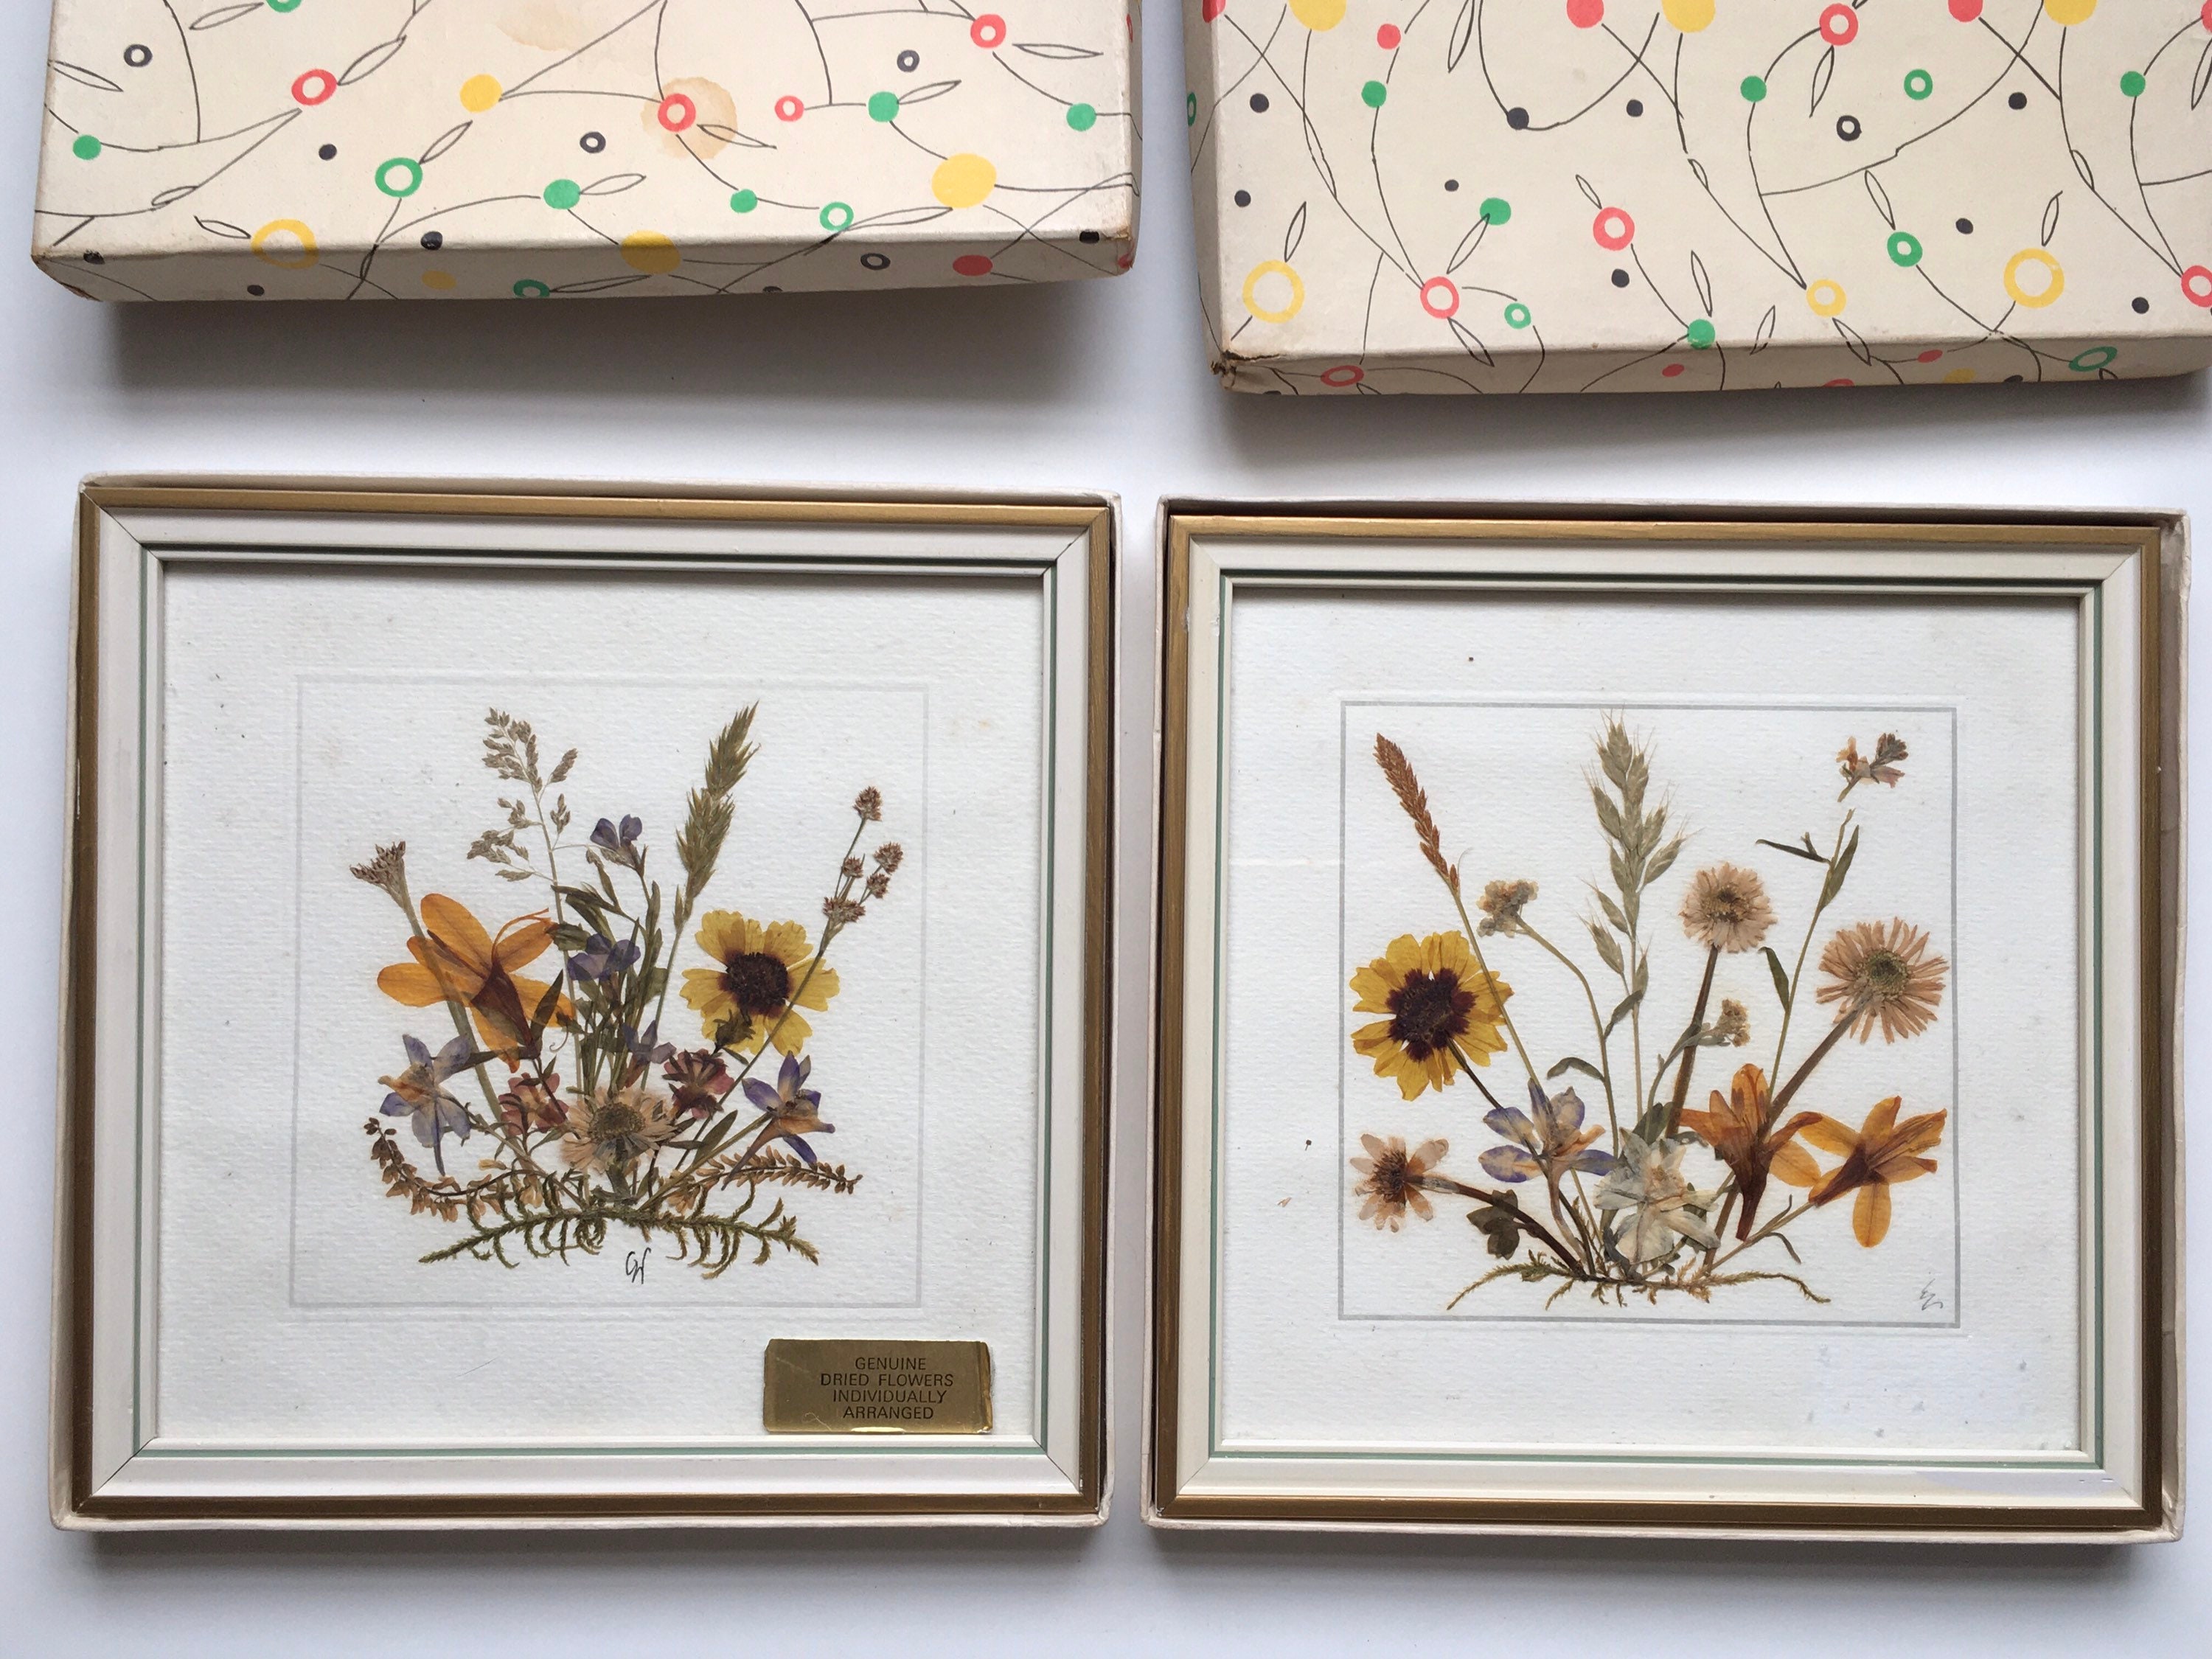 Home Decor A4 Frame Handmade Picture Real Flowers Dried Flowers